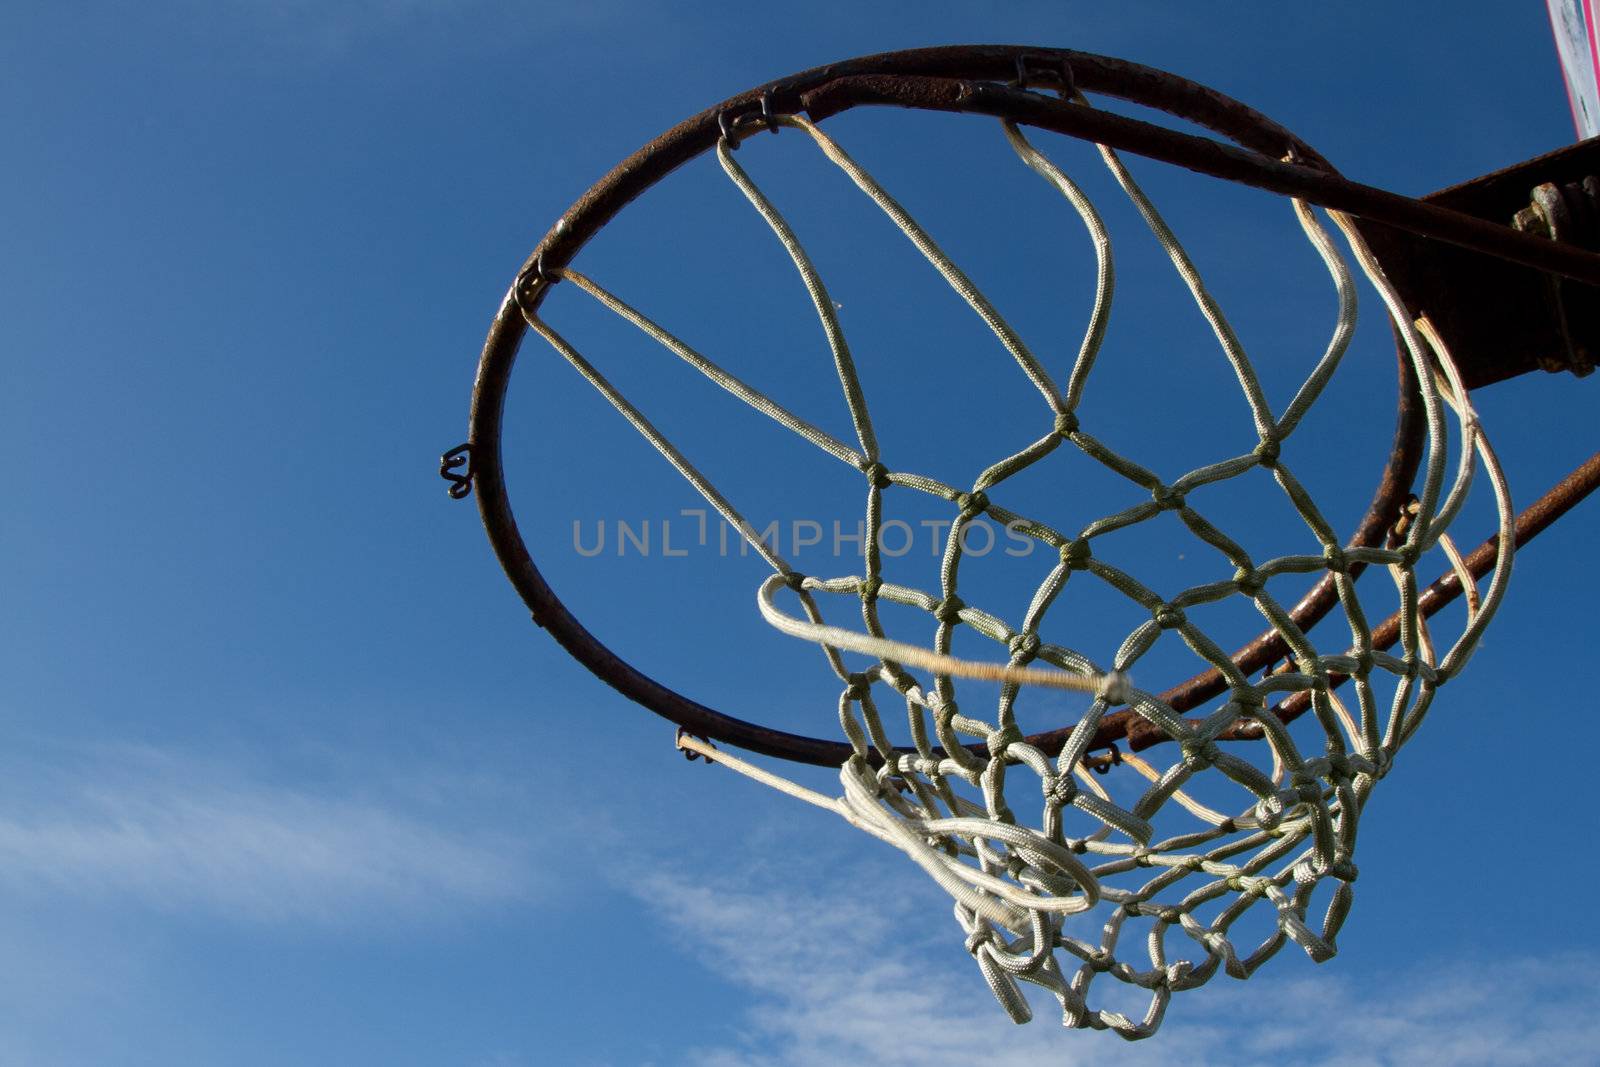 Basketball hoop, rusty ring and broken rope netting set against a blue sky.